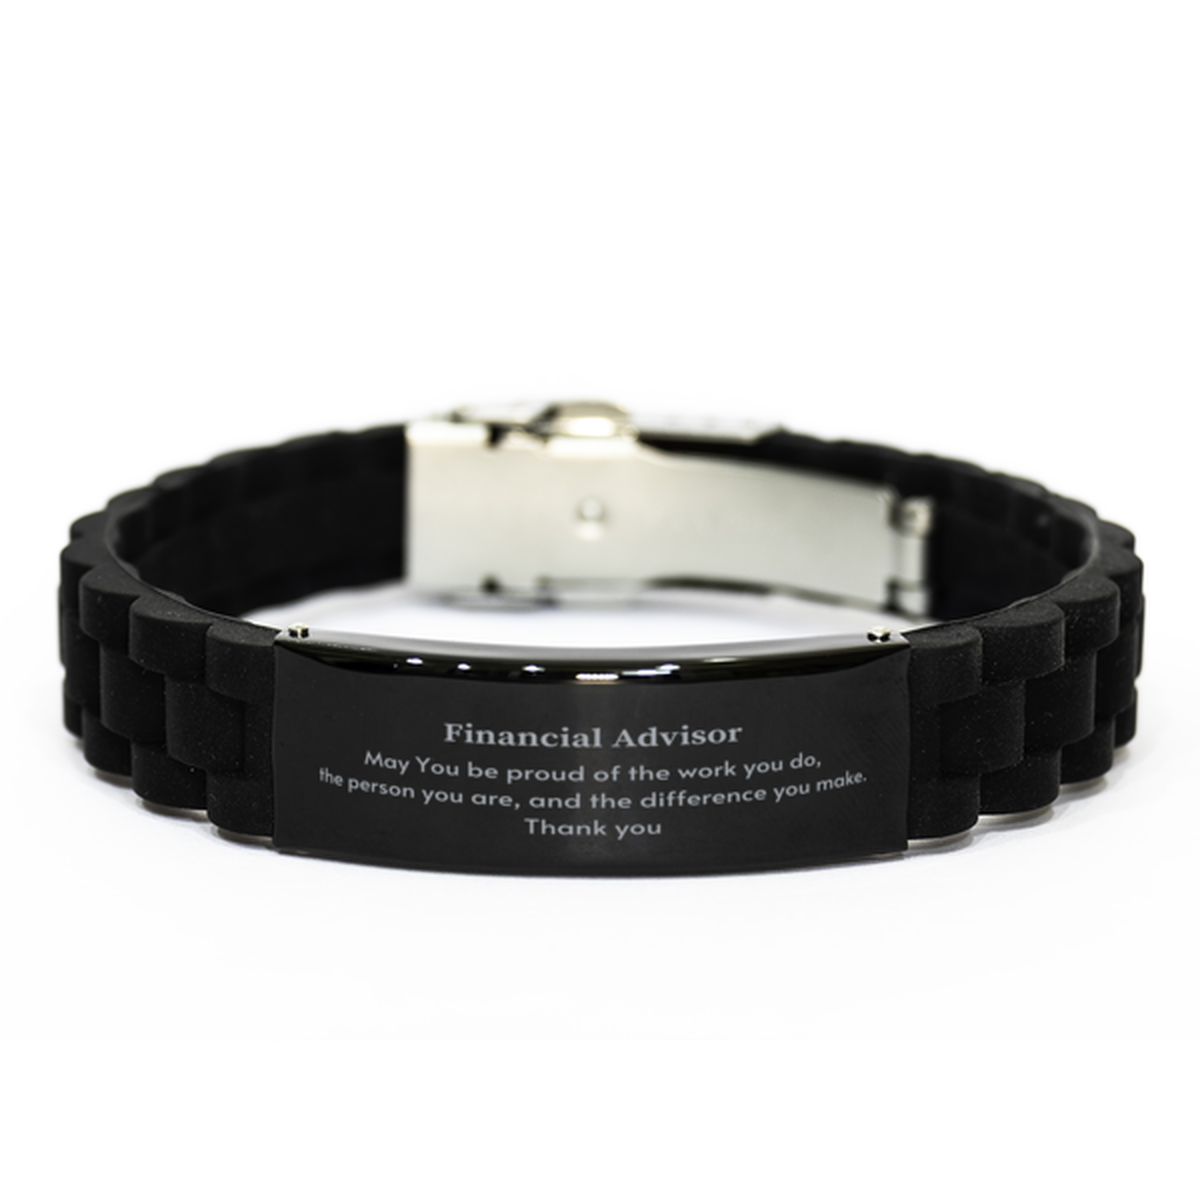 Heartwarming Black Glidelock Clasp Bracelet Retirement Coworkers Gifts for Financial Advisor, Financial Advisor May You be proud of the work you do, the person you are Gifts for Boss Men Women Friends